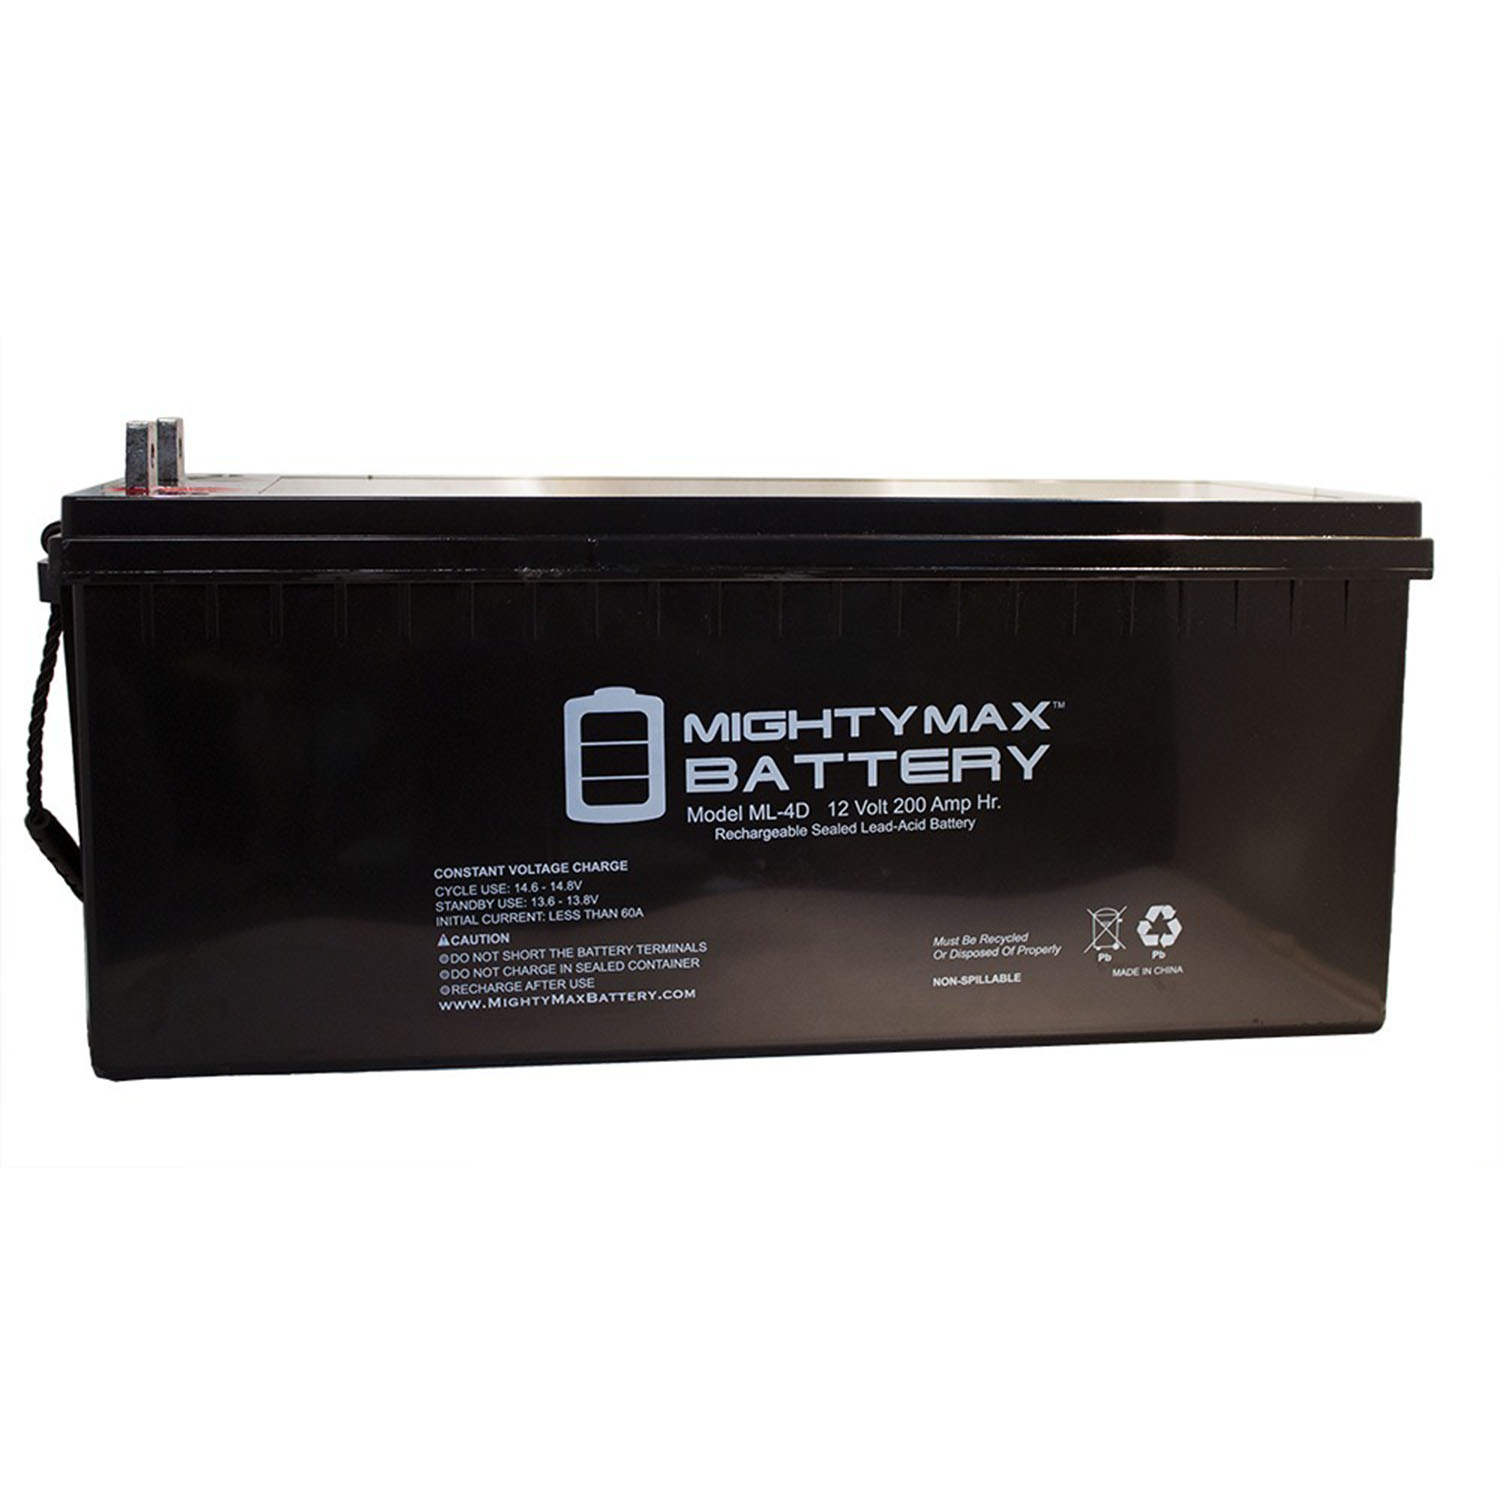 Mighty Max Battery - Sealed Lead-Acid Battery - AGM-type, 12V, 200 Amps - ML4D